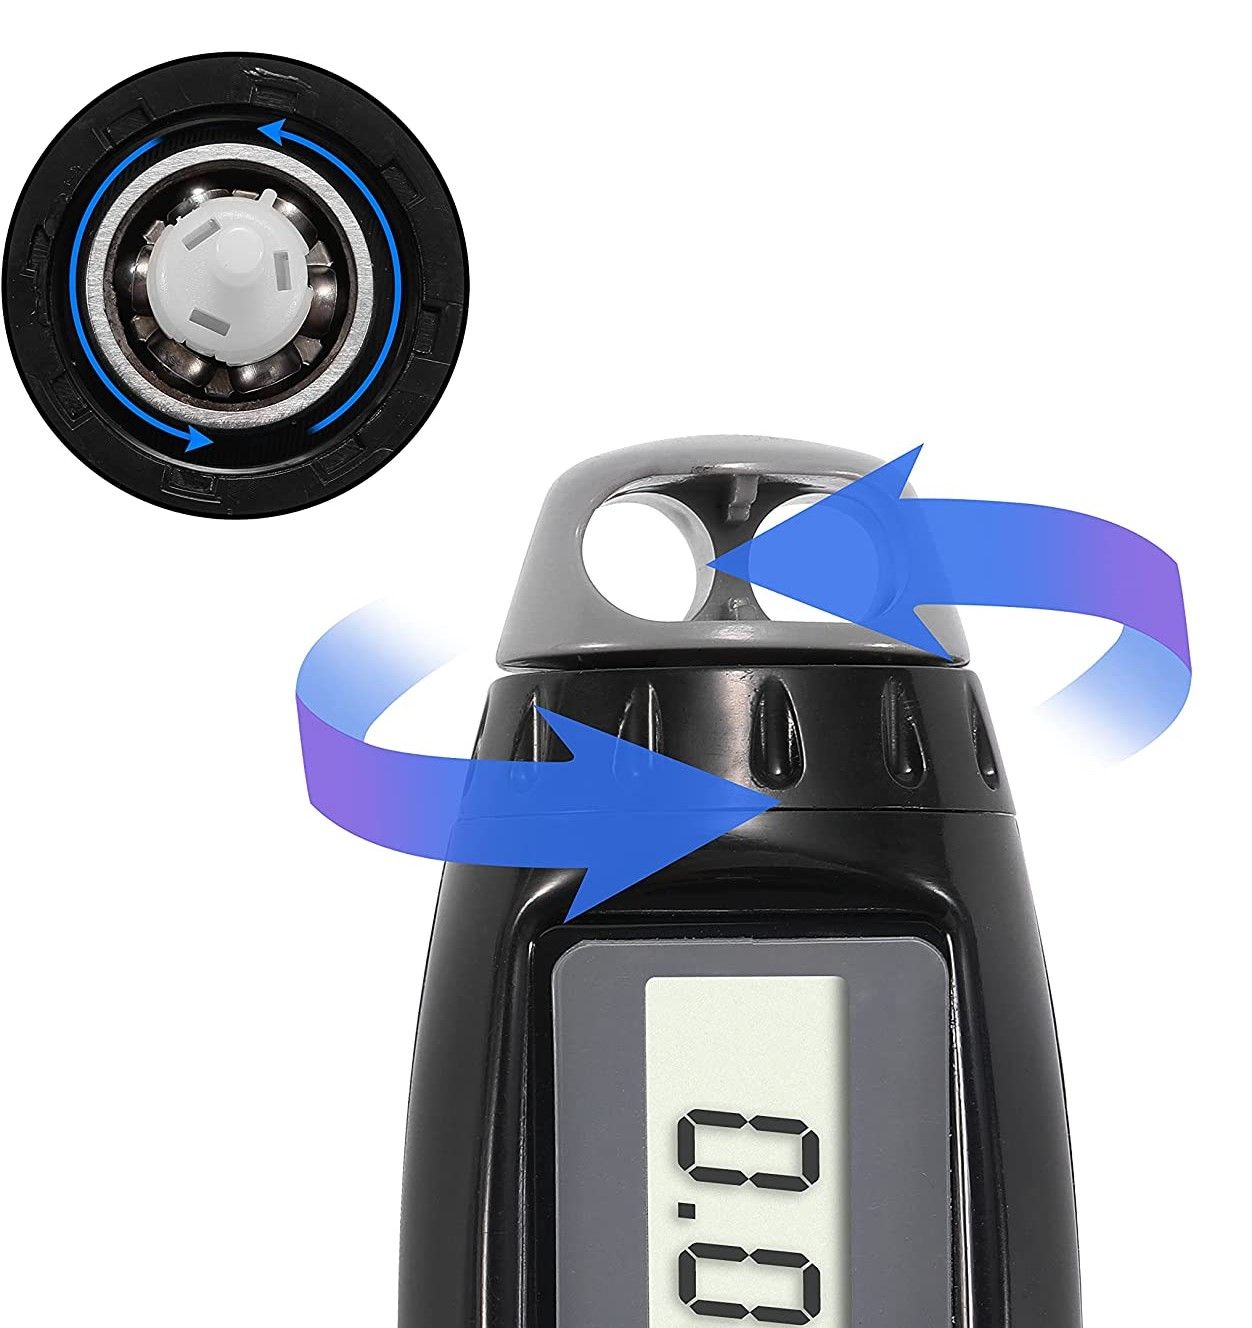 Gafuns Jump Rope with Digital Counter 2